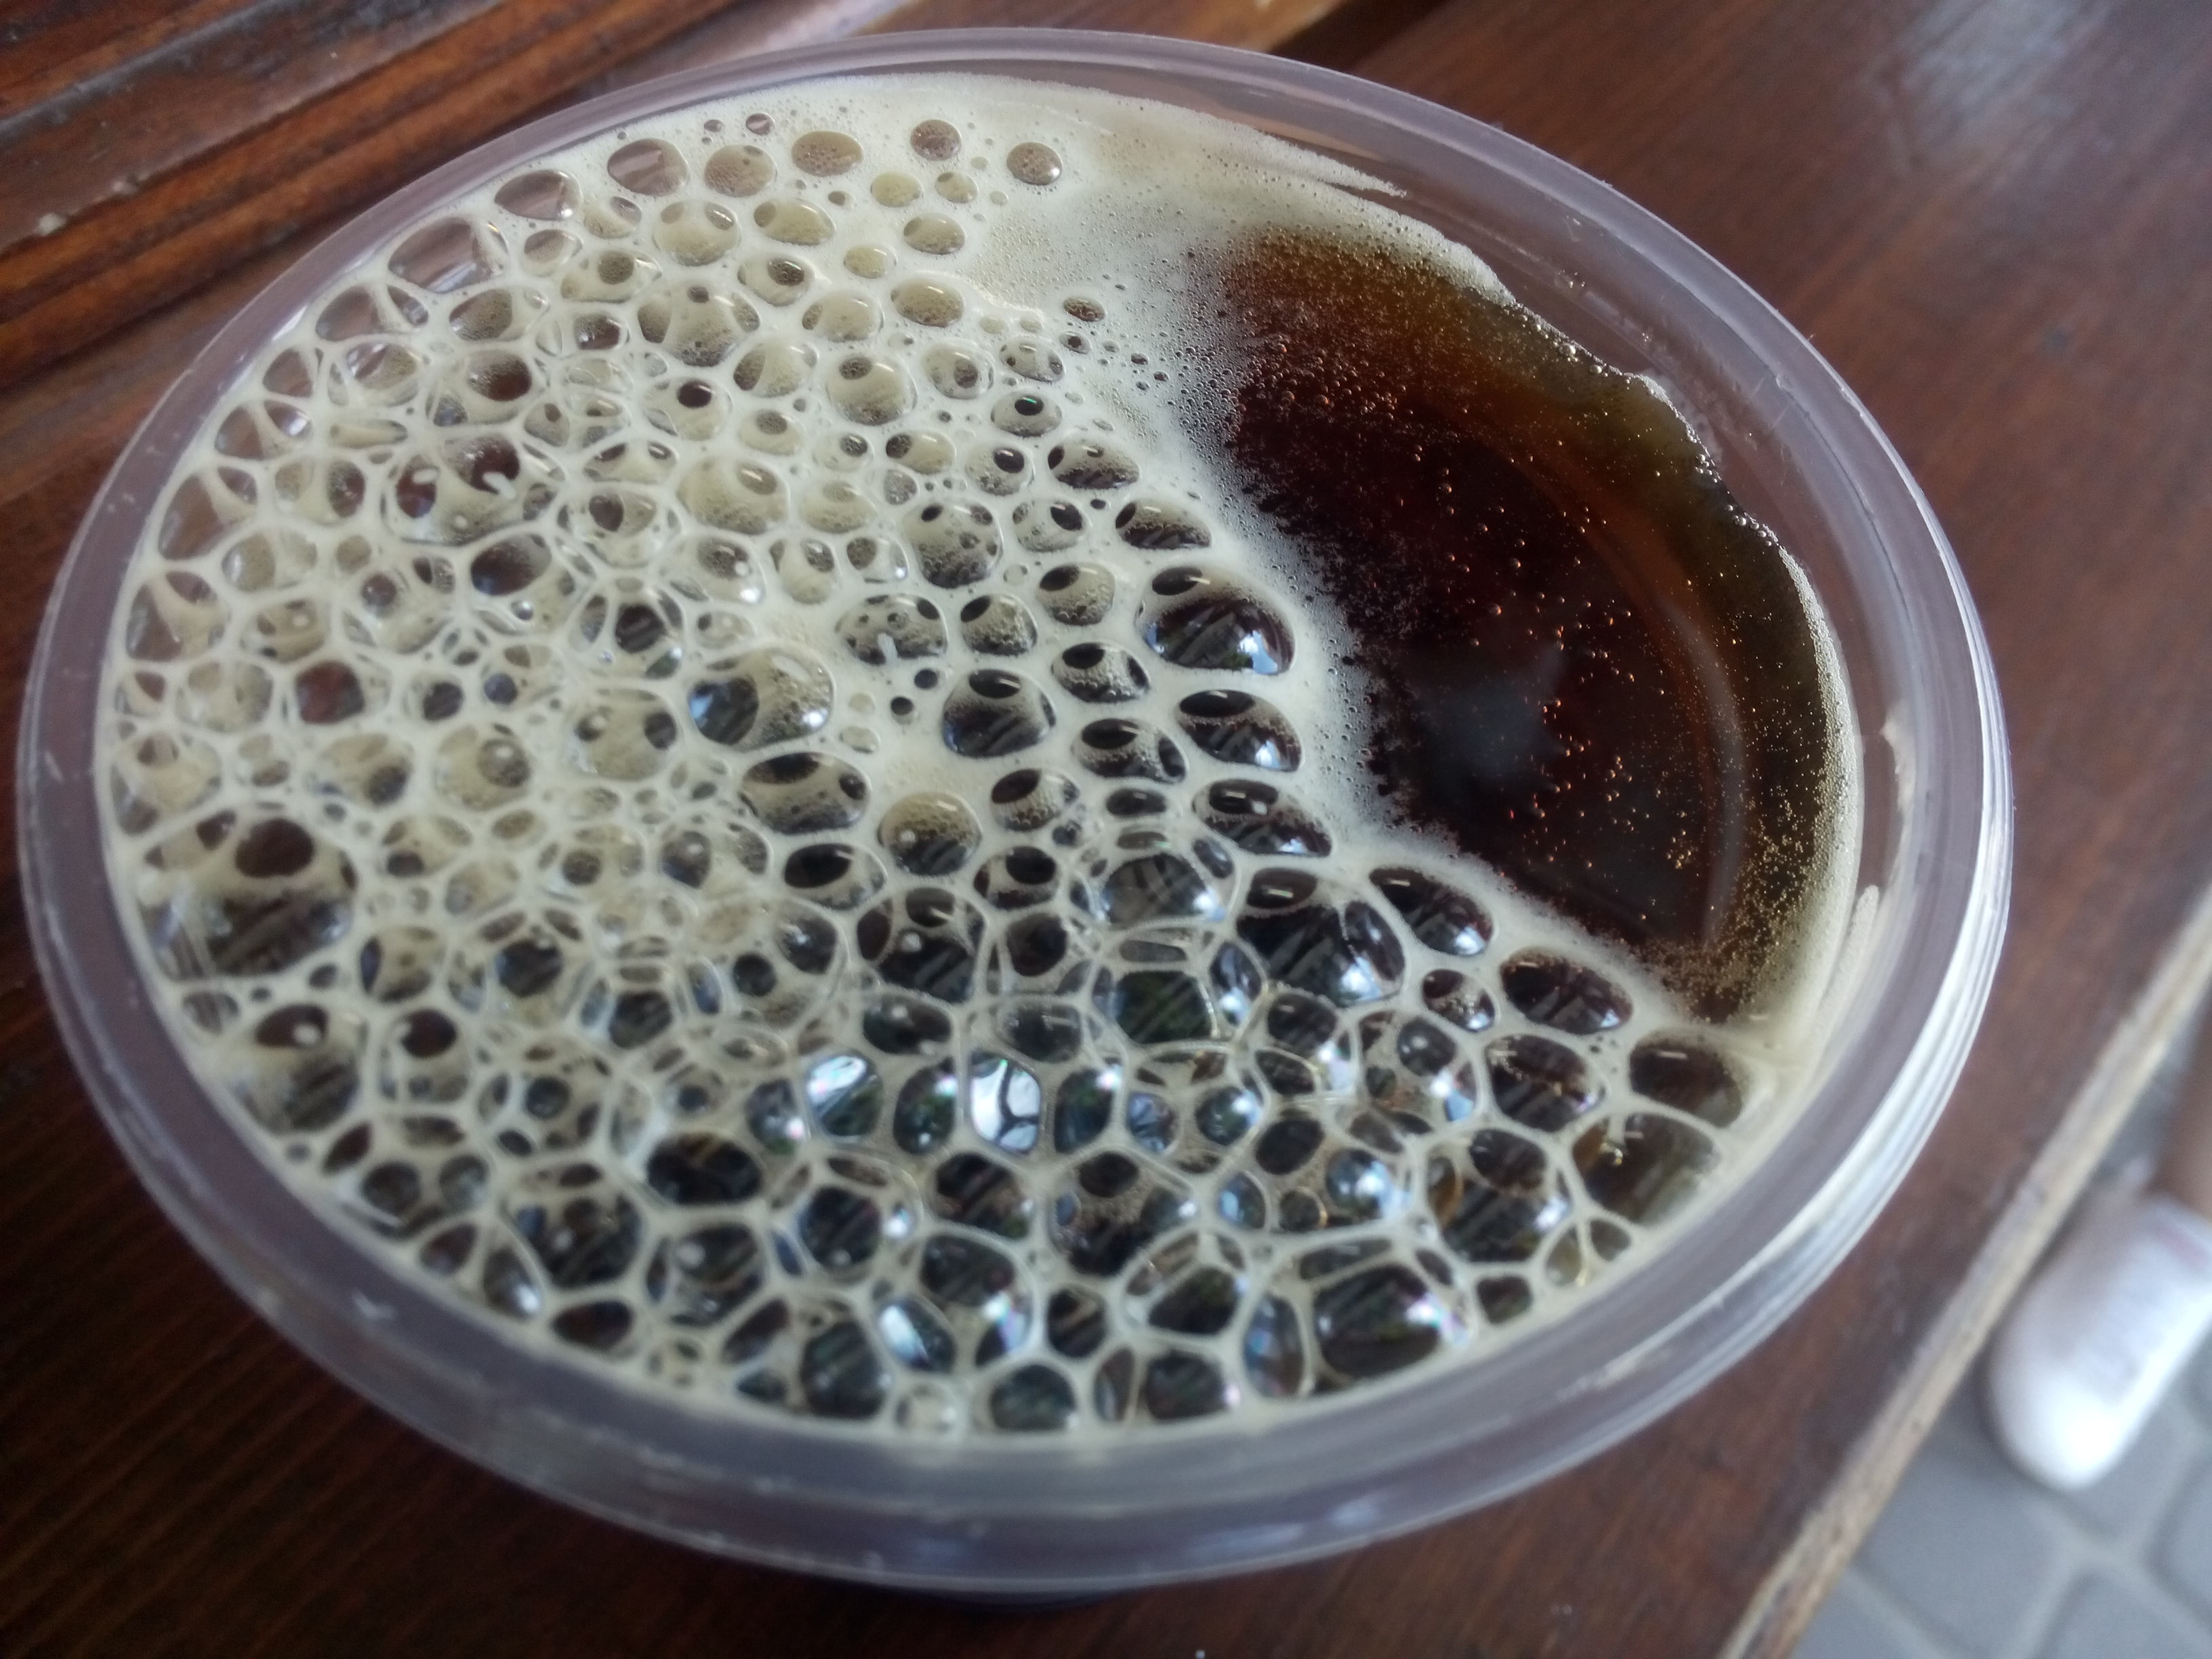 A plastic cup with brown bubbly foamy liquid